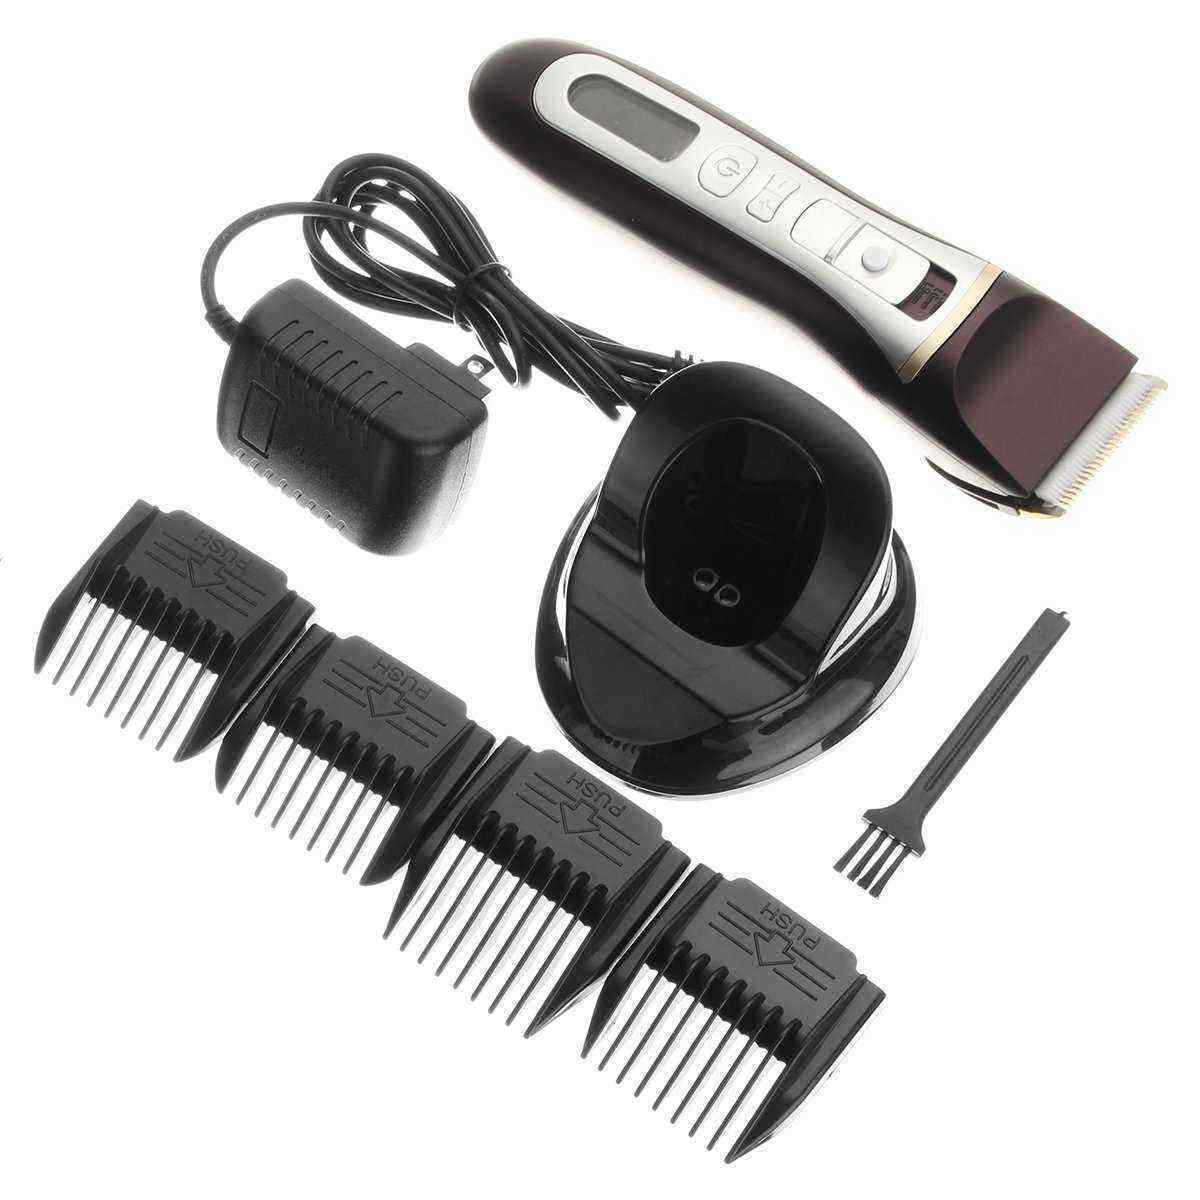 100V-240V-Electric-Hair-Clipper-Gold-Black-Charging-LCD-Display-Hair-Trimmer-With-Comb-1272013